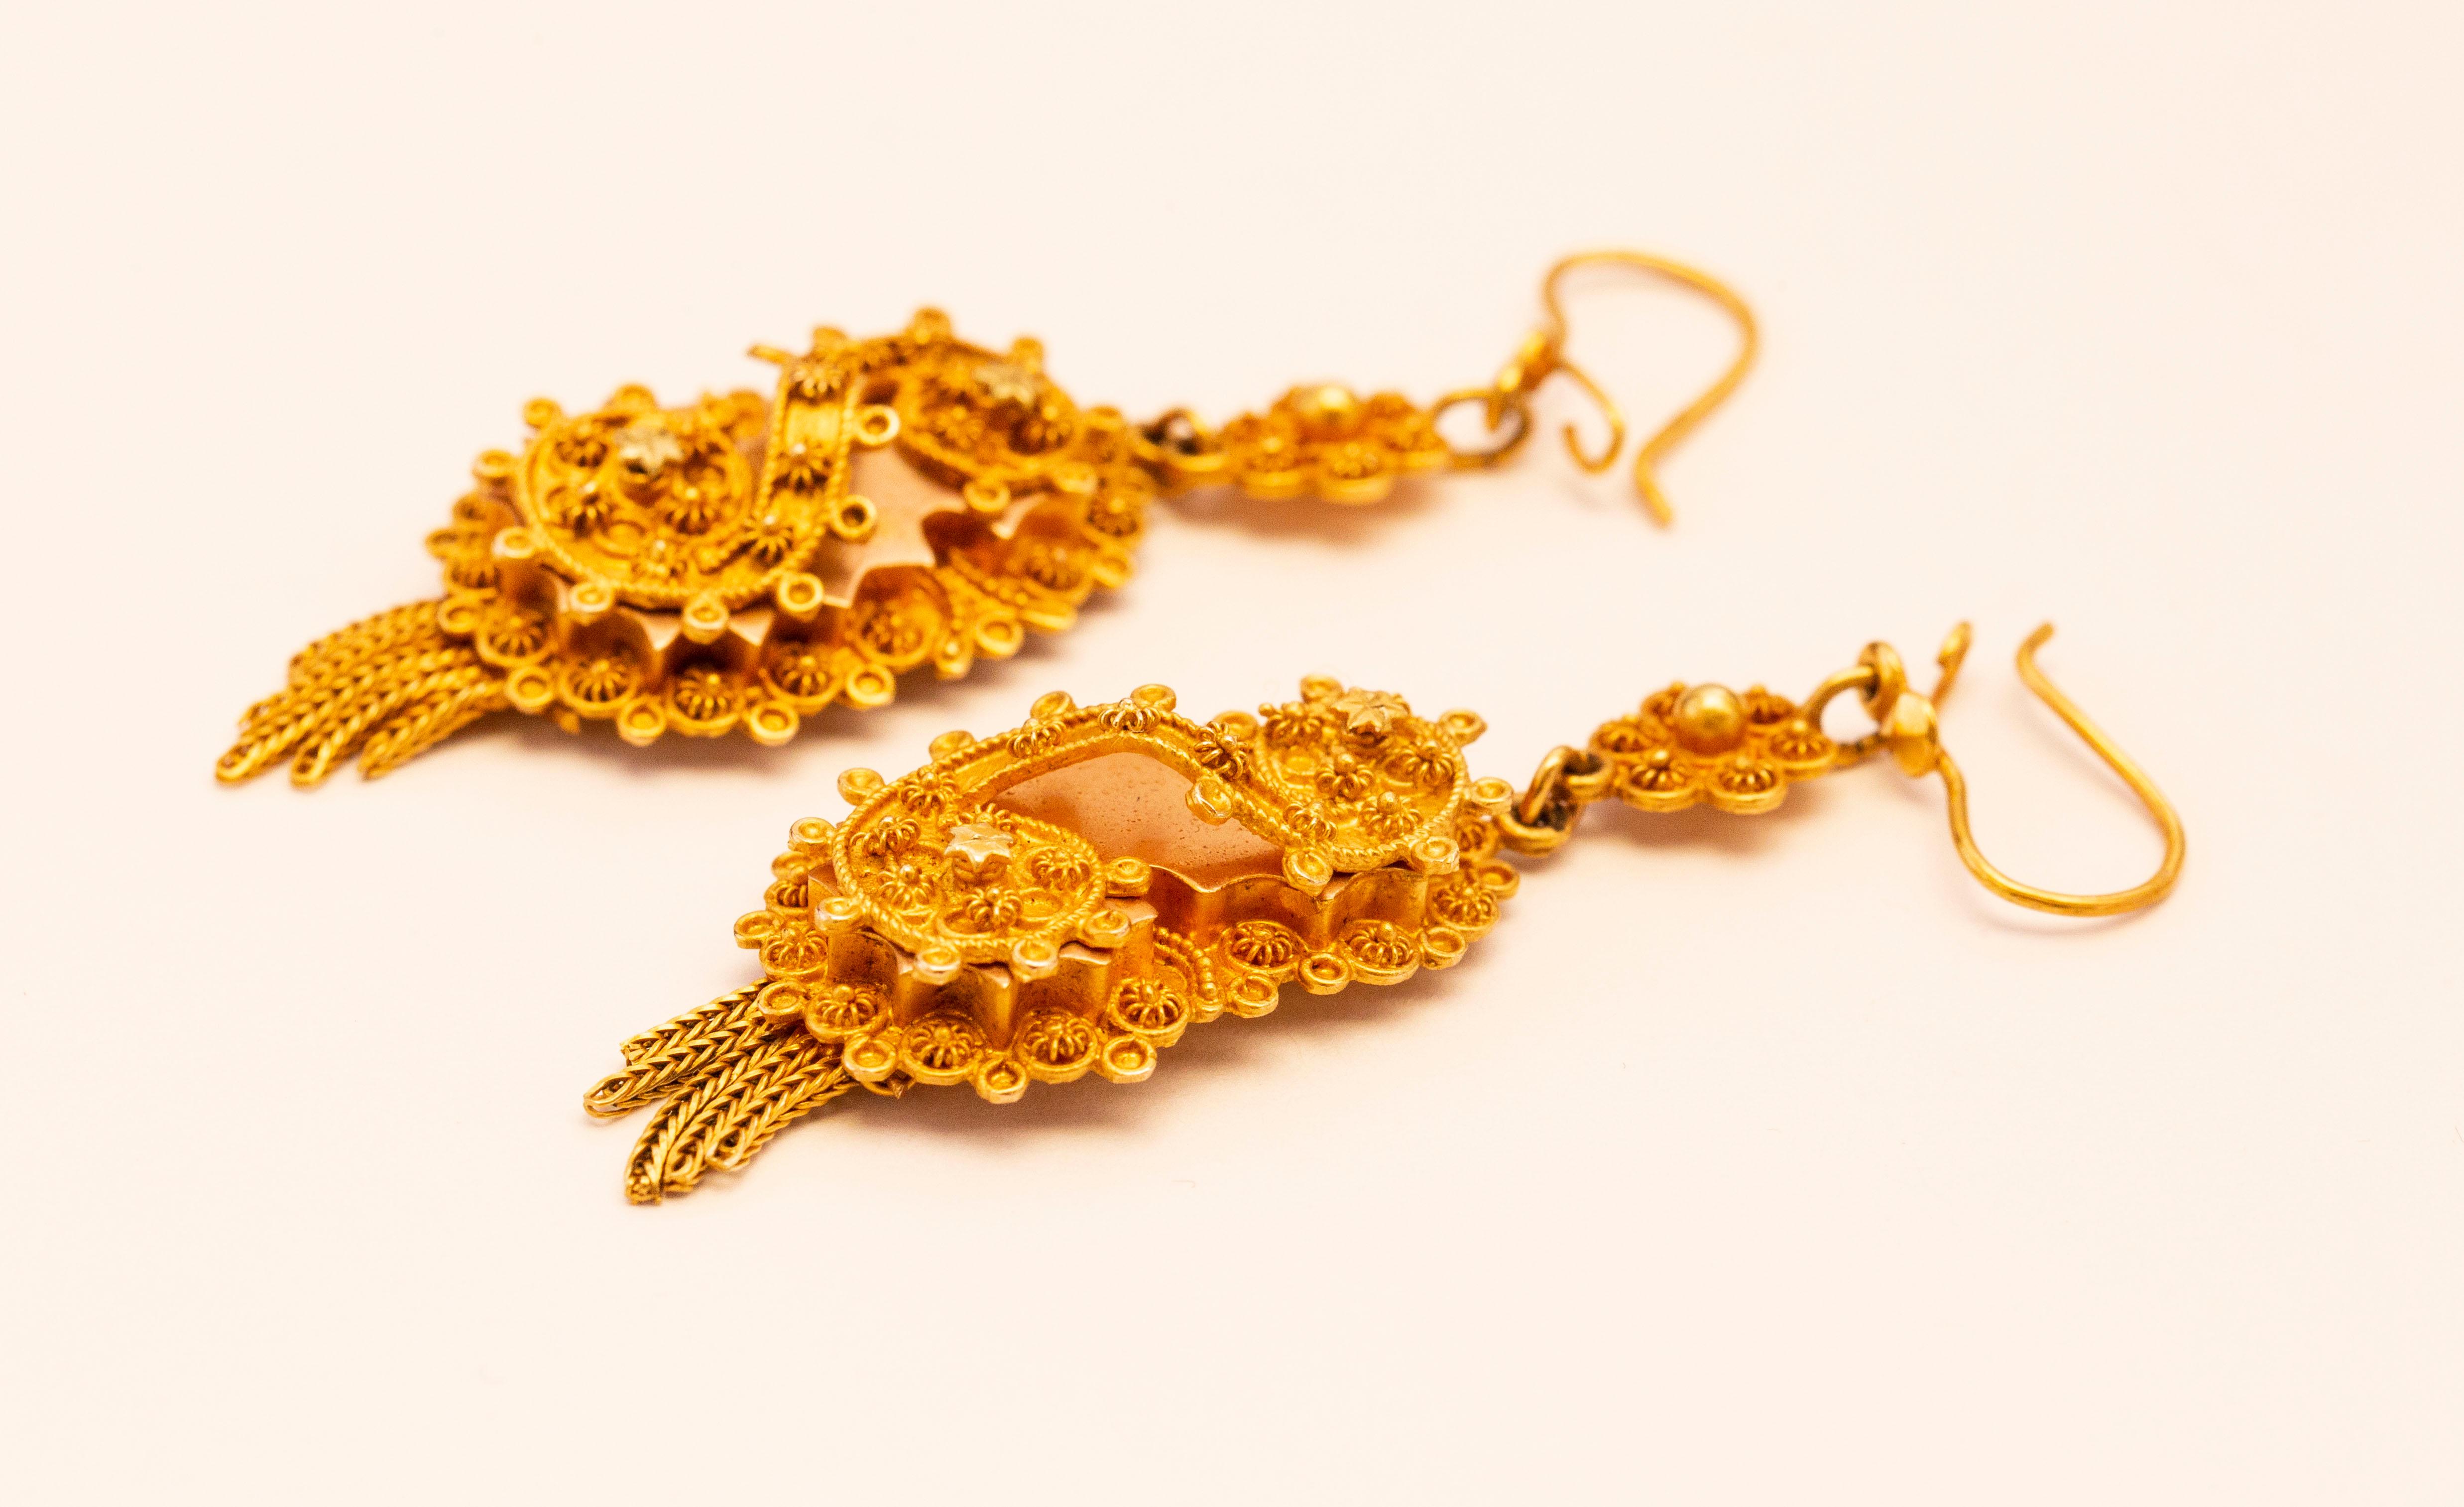 Antique Dutch 14 karat yellow and rose gold dangle earrings made with filigree technique. Filigree is a very refined technique that uses a thin golden thread to form a lace-like pattern or even fine embroidery. Each earring features very